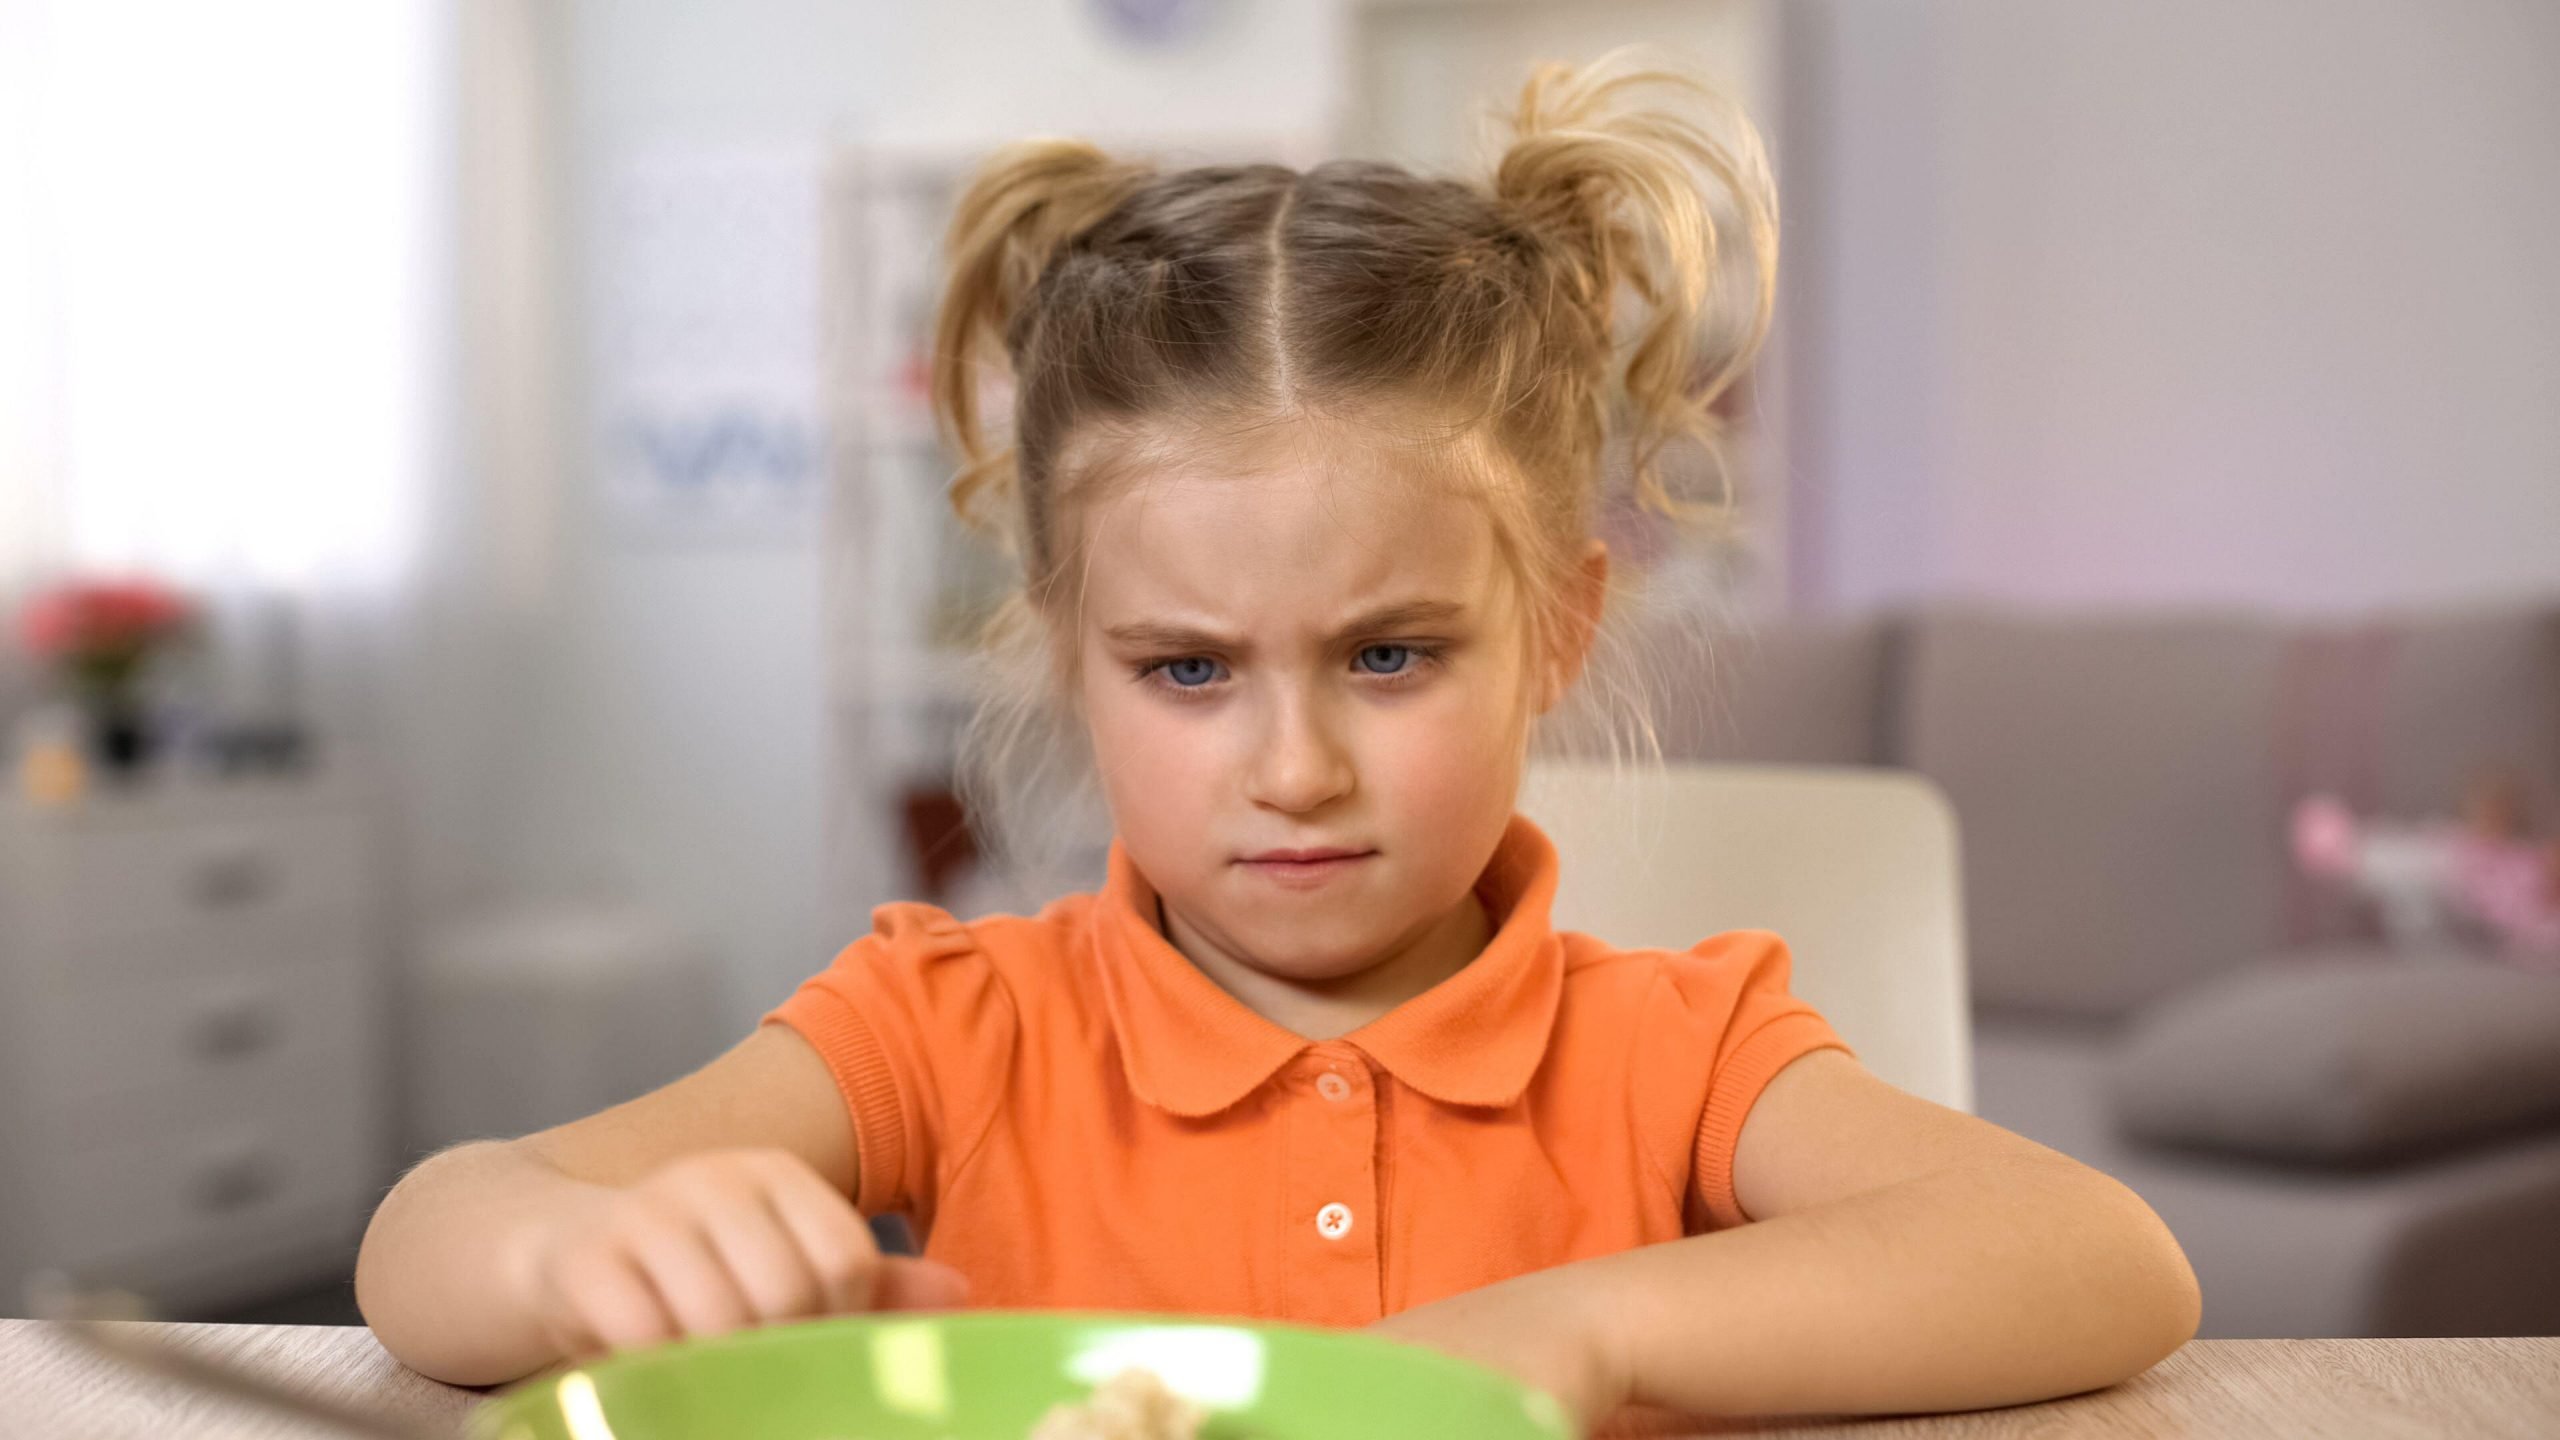 Does my child have an eating disorder? Warning signs and ...